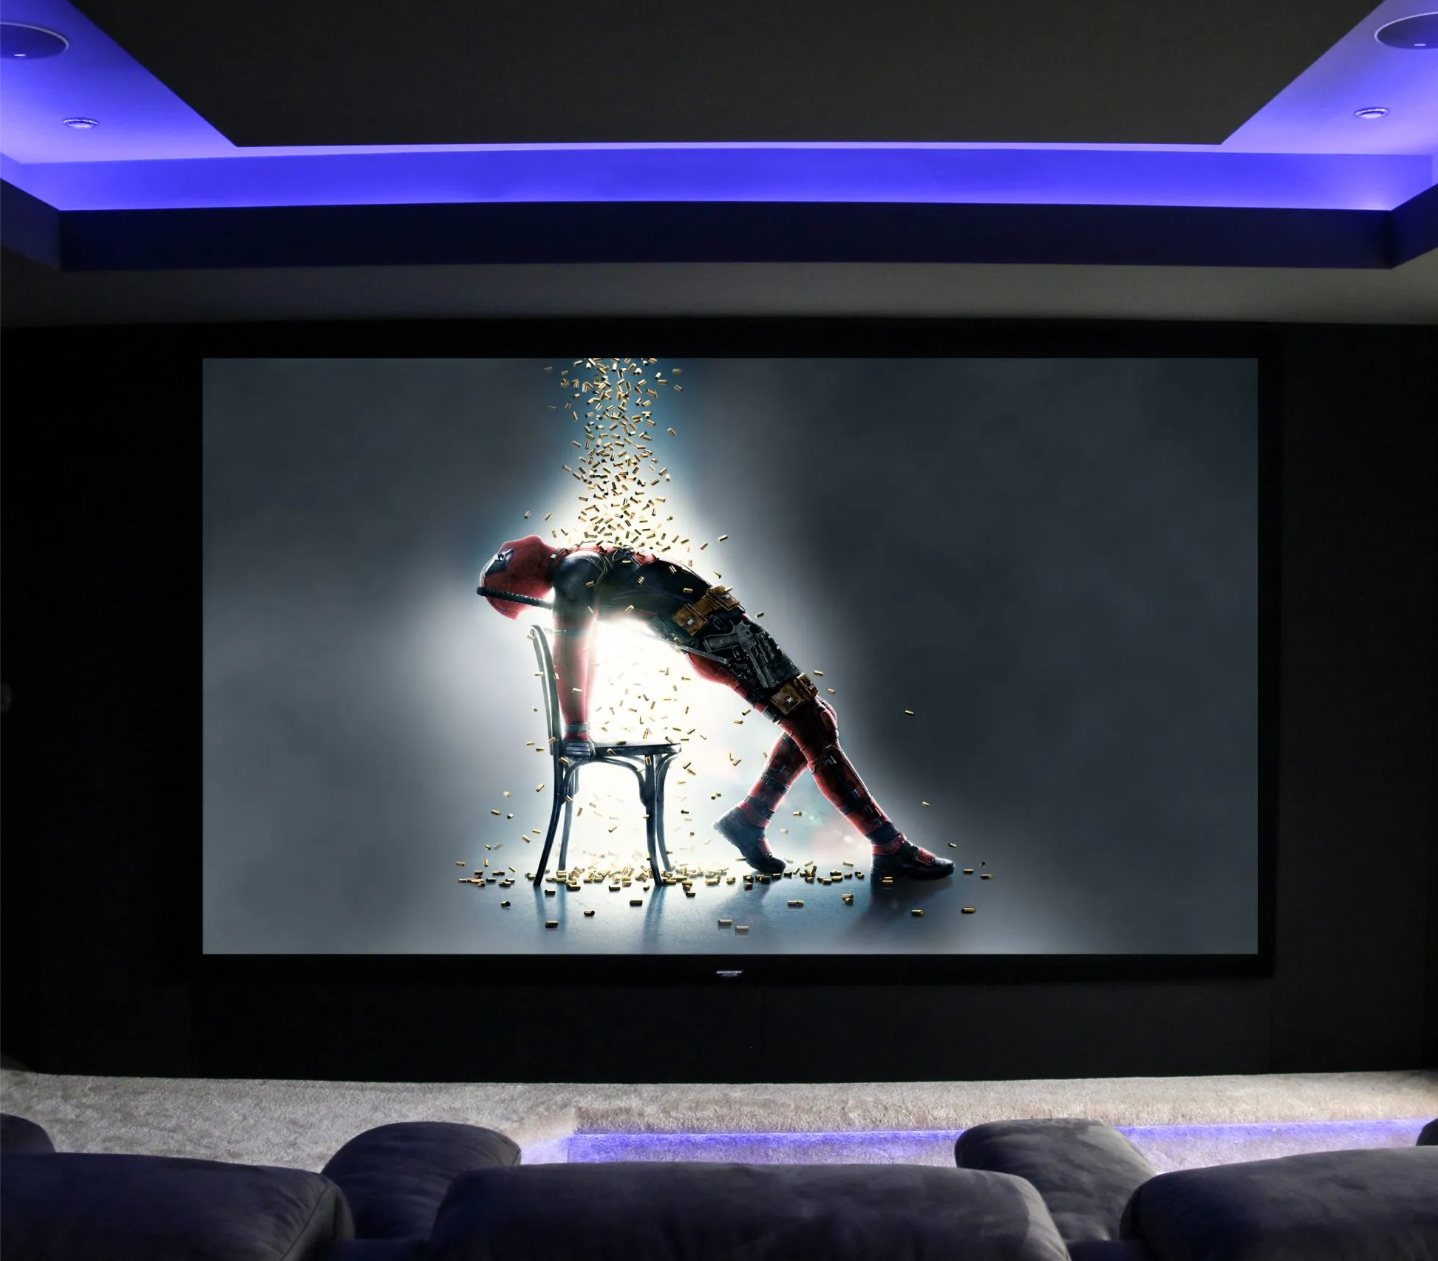 Large cinema screen with dancer using chair. Purple mood lighting in ceiling